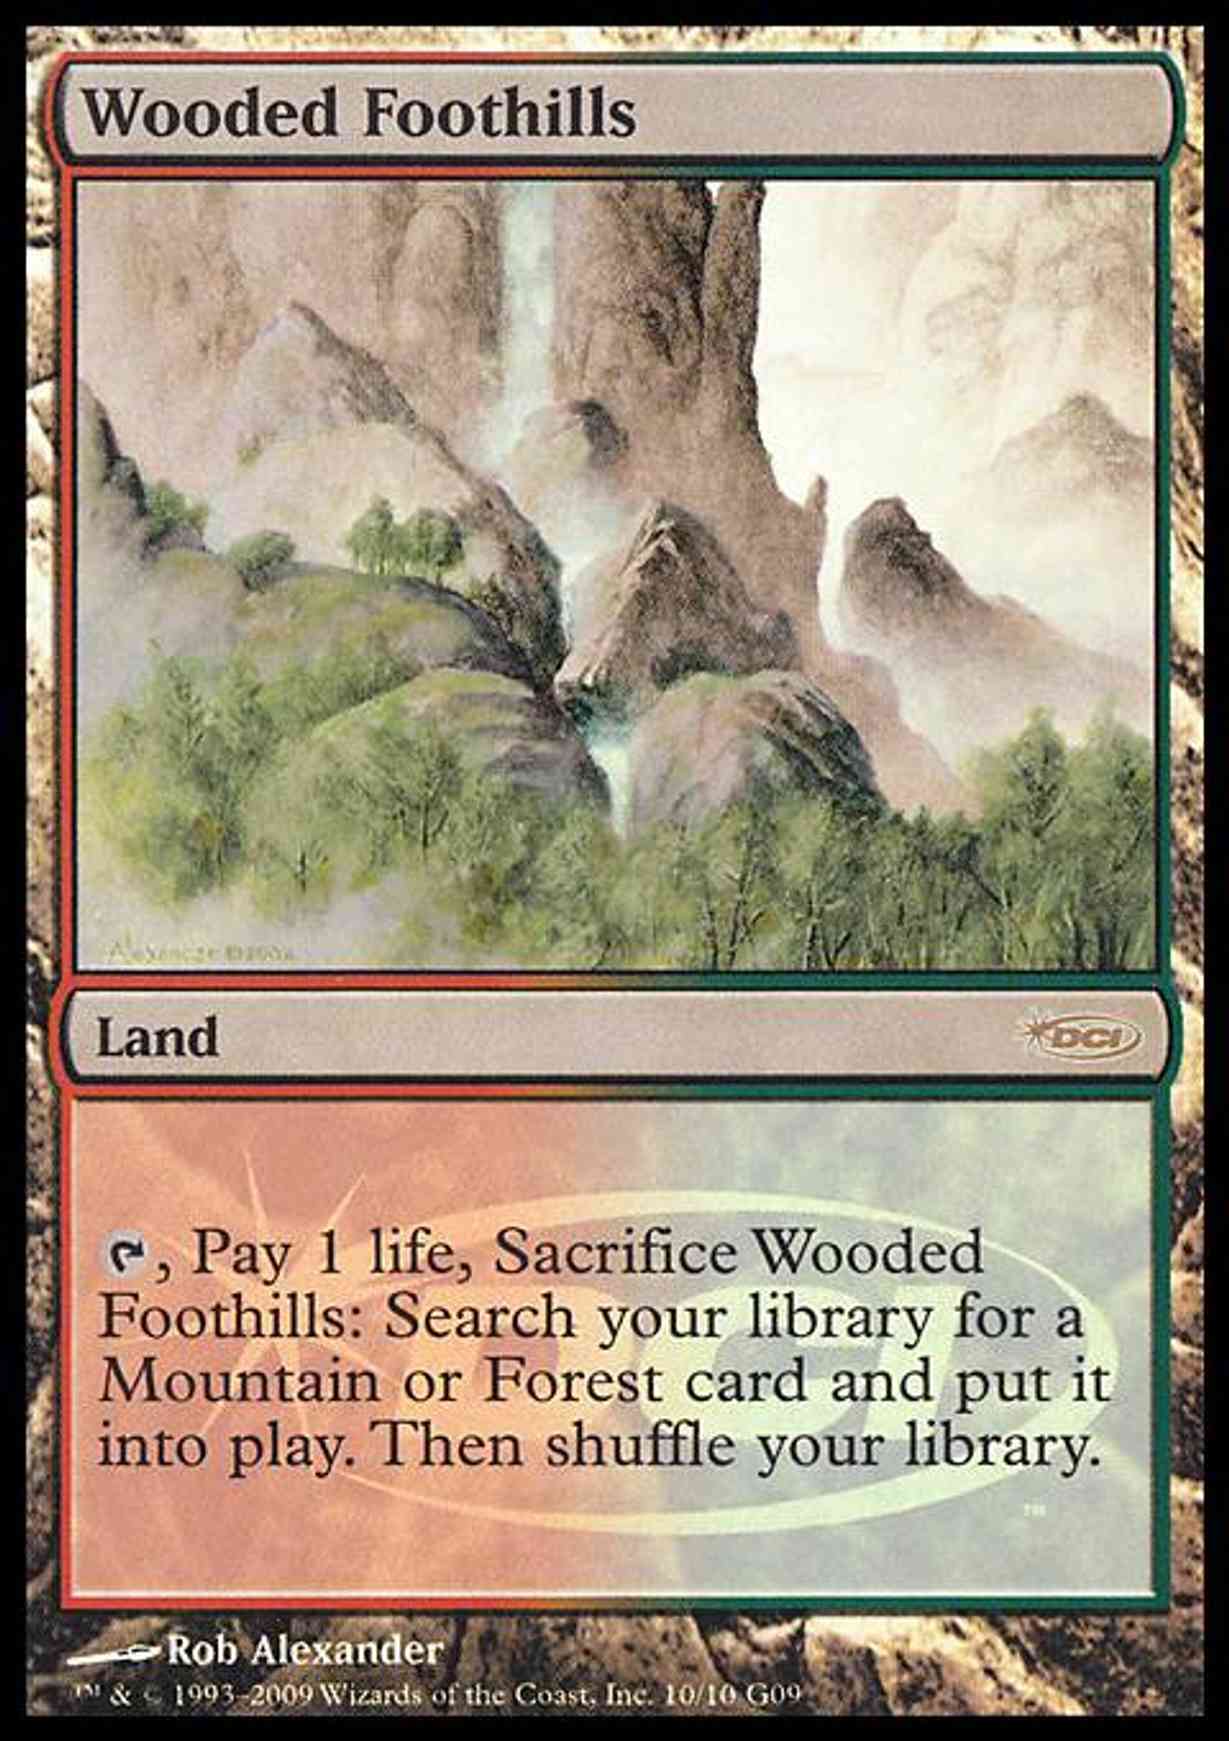 Wooded Foothills magic card front